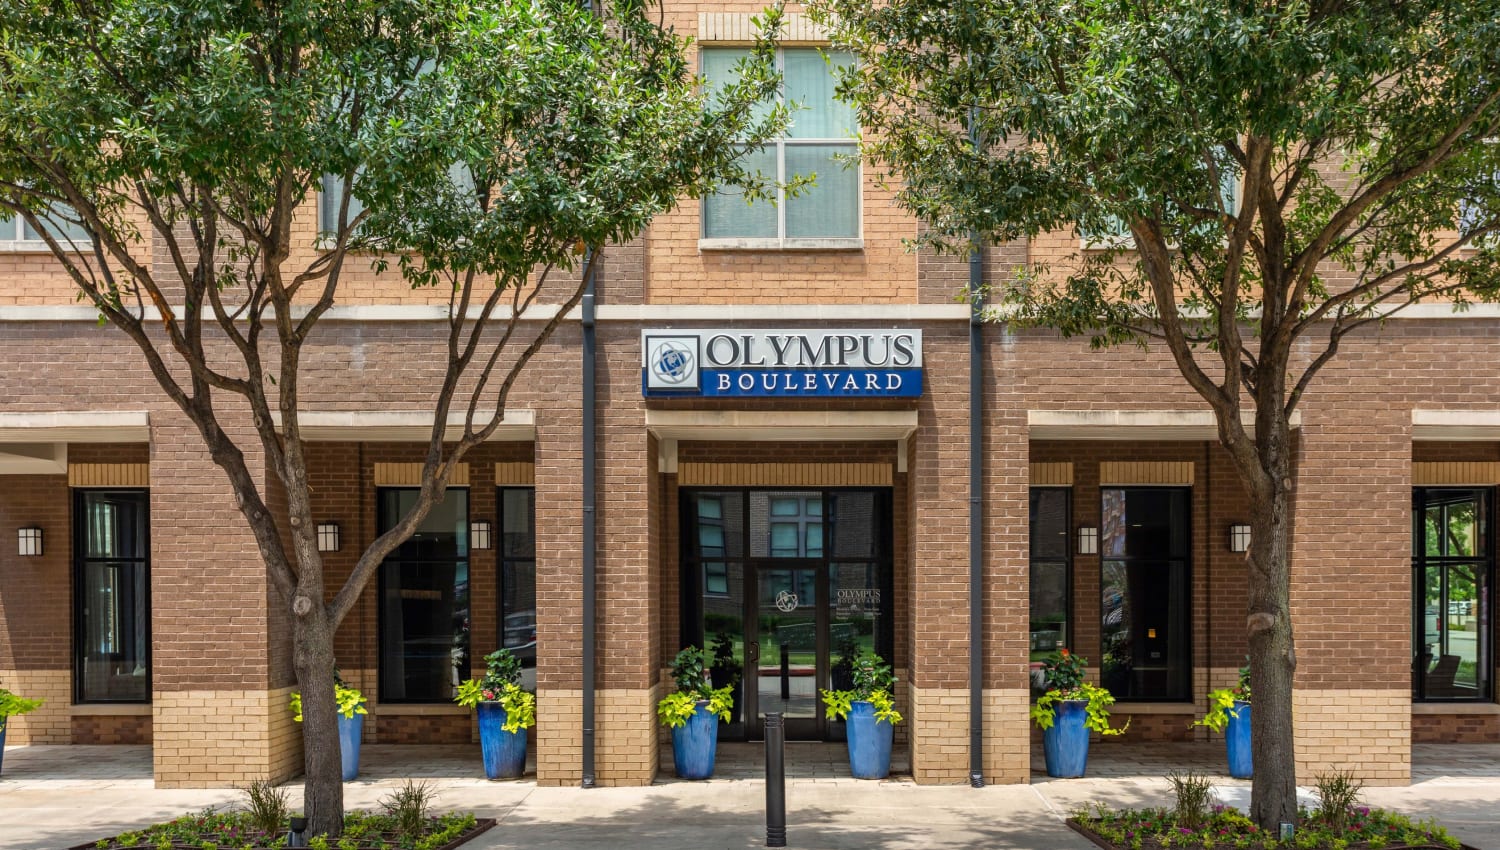 Leasing office outdoor shot of Olympus Boulevard in Frisco, Texas